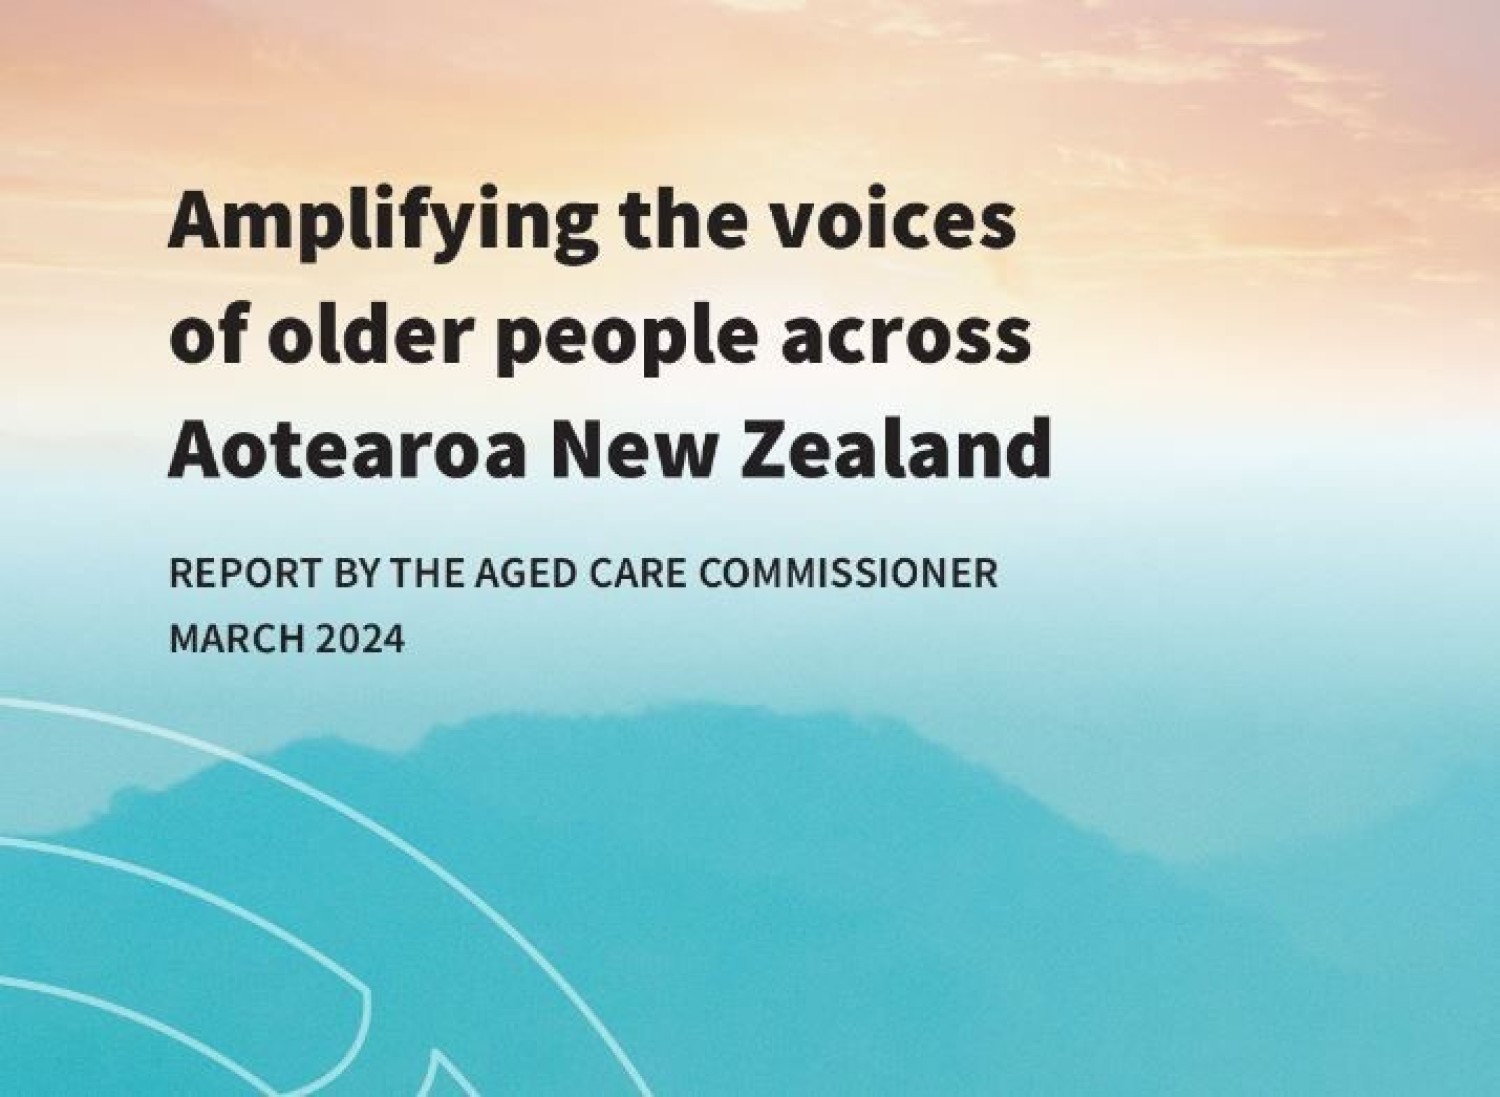 Aged Care Commissioner Report Released